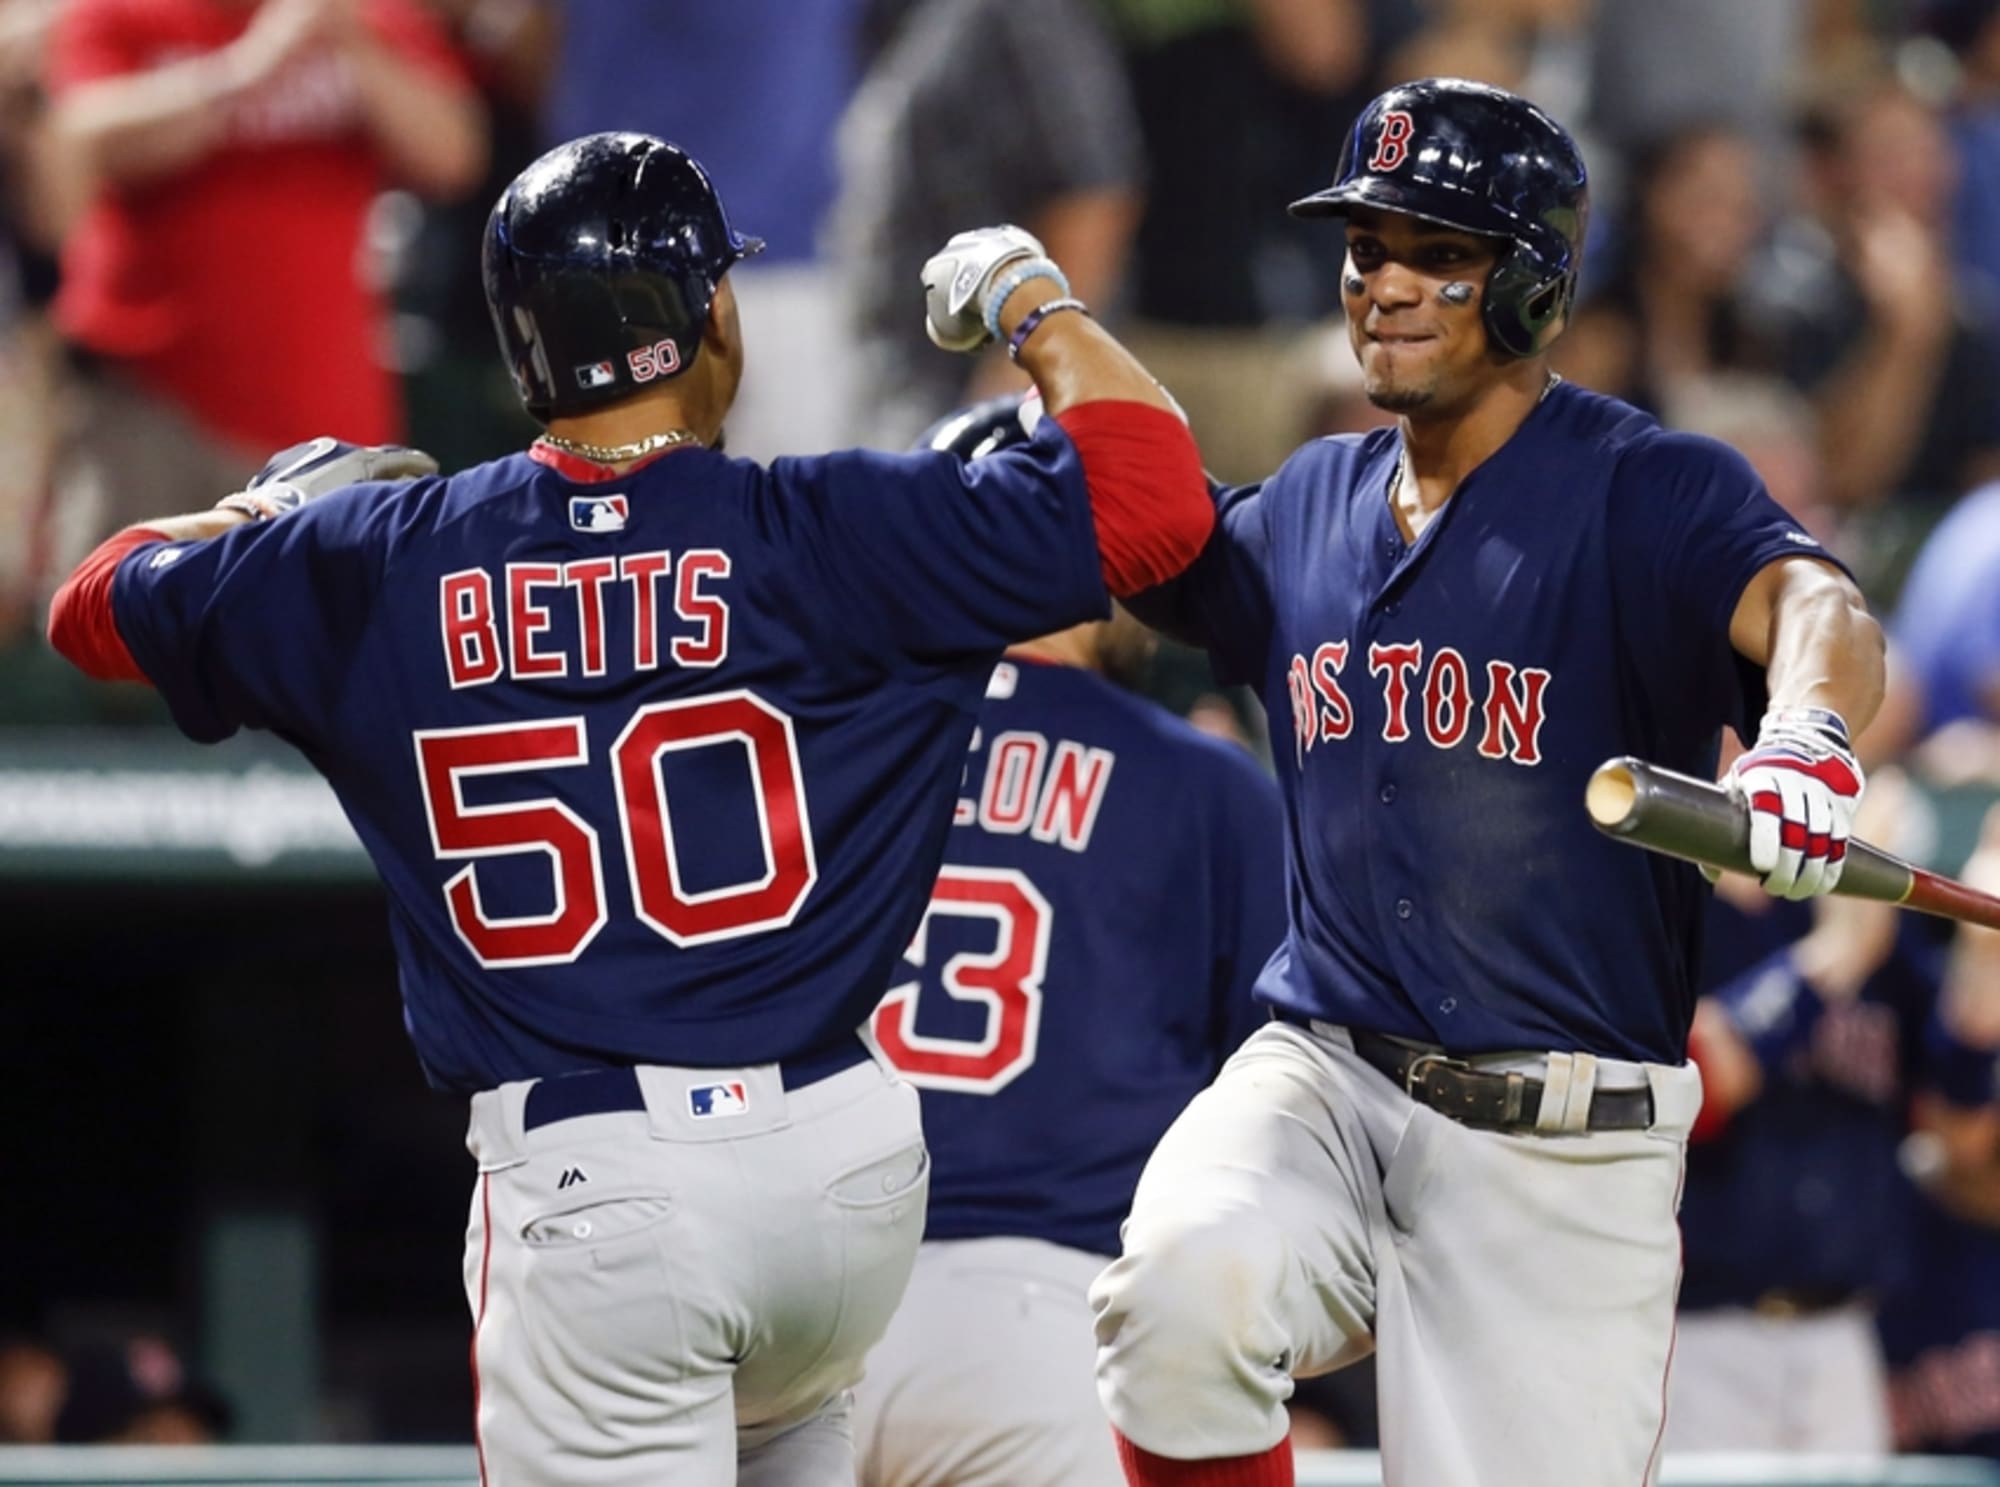 All about Red Sox star Xander Bogaerts with stats and contract